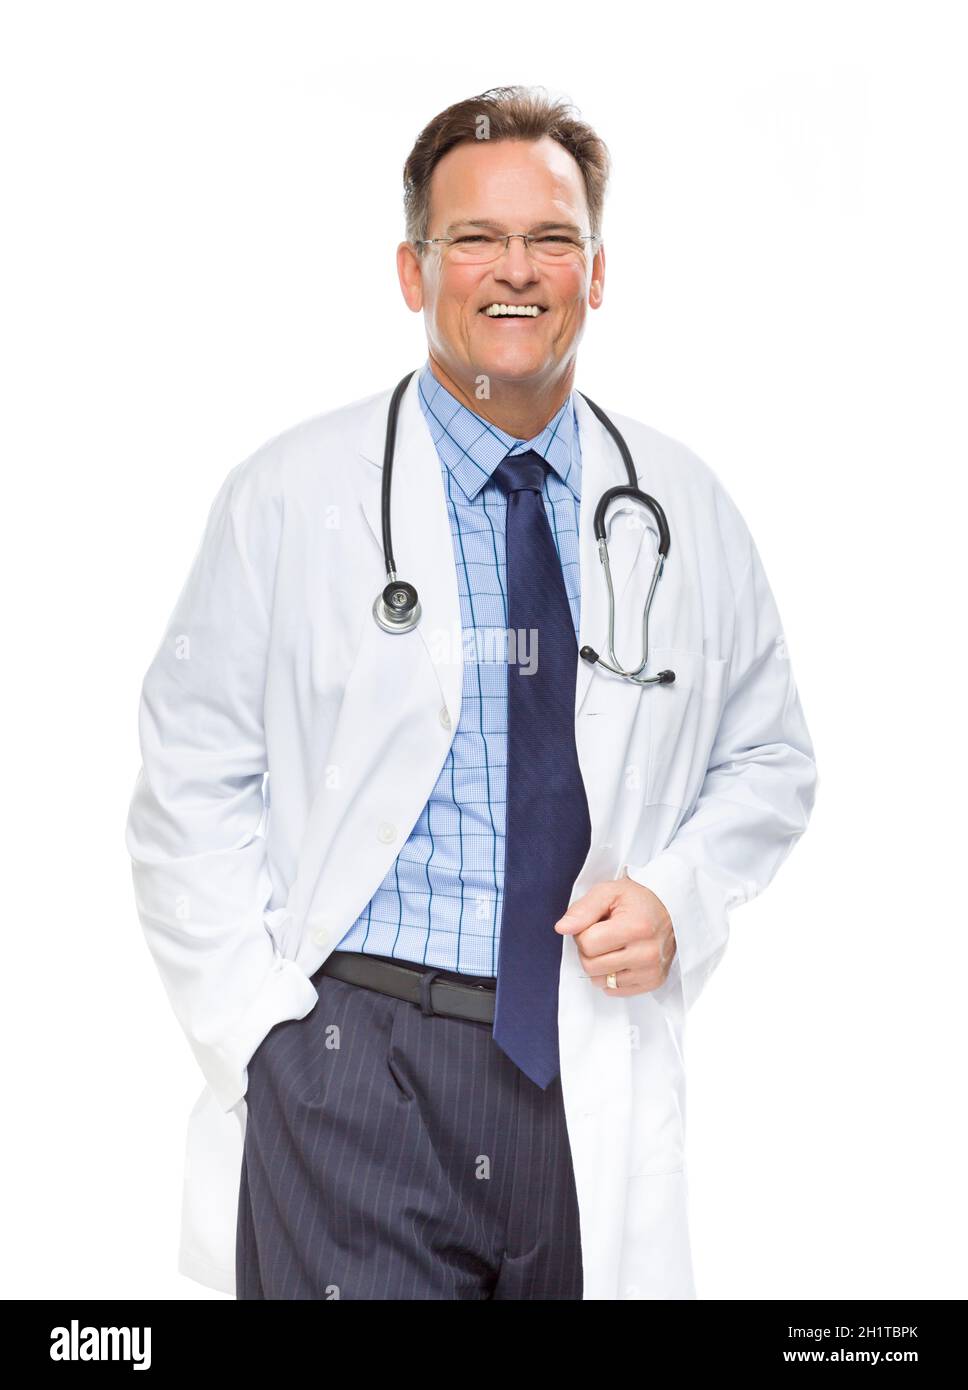 Handsome Smiling Male Doctor in Lab Coat with Stethoscope Isolated on a White Background. Stock Photo